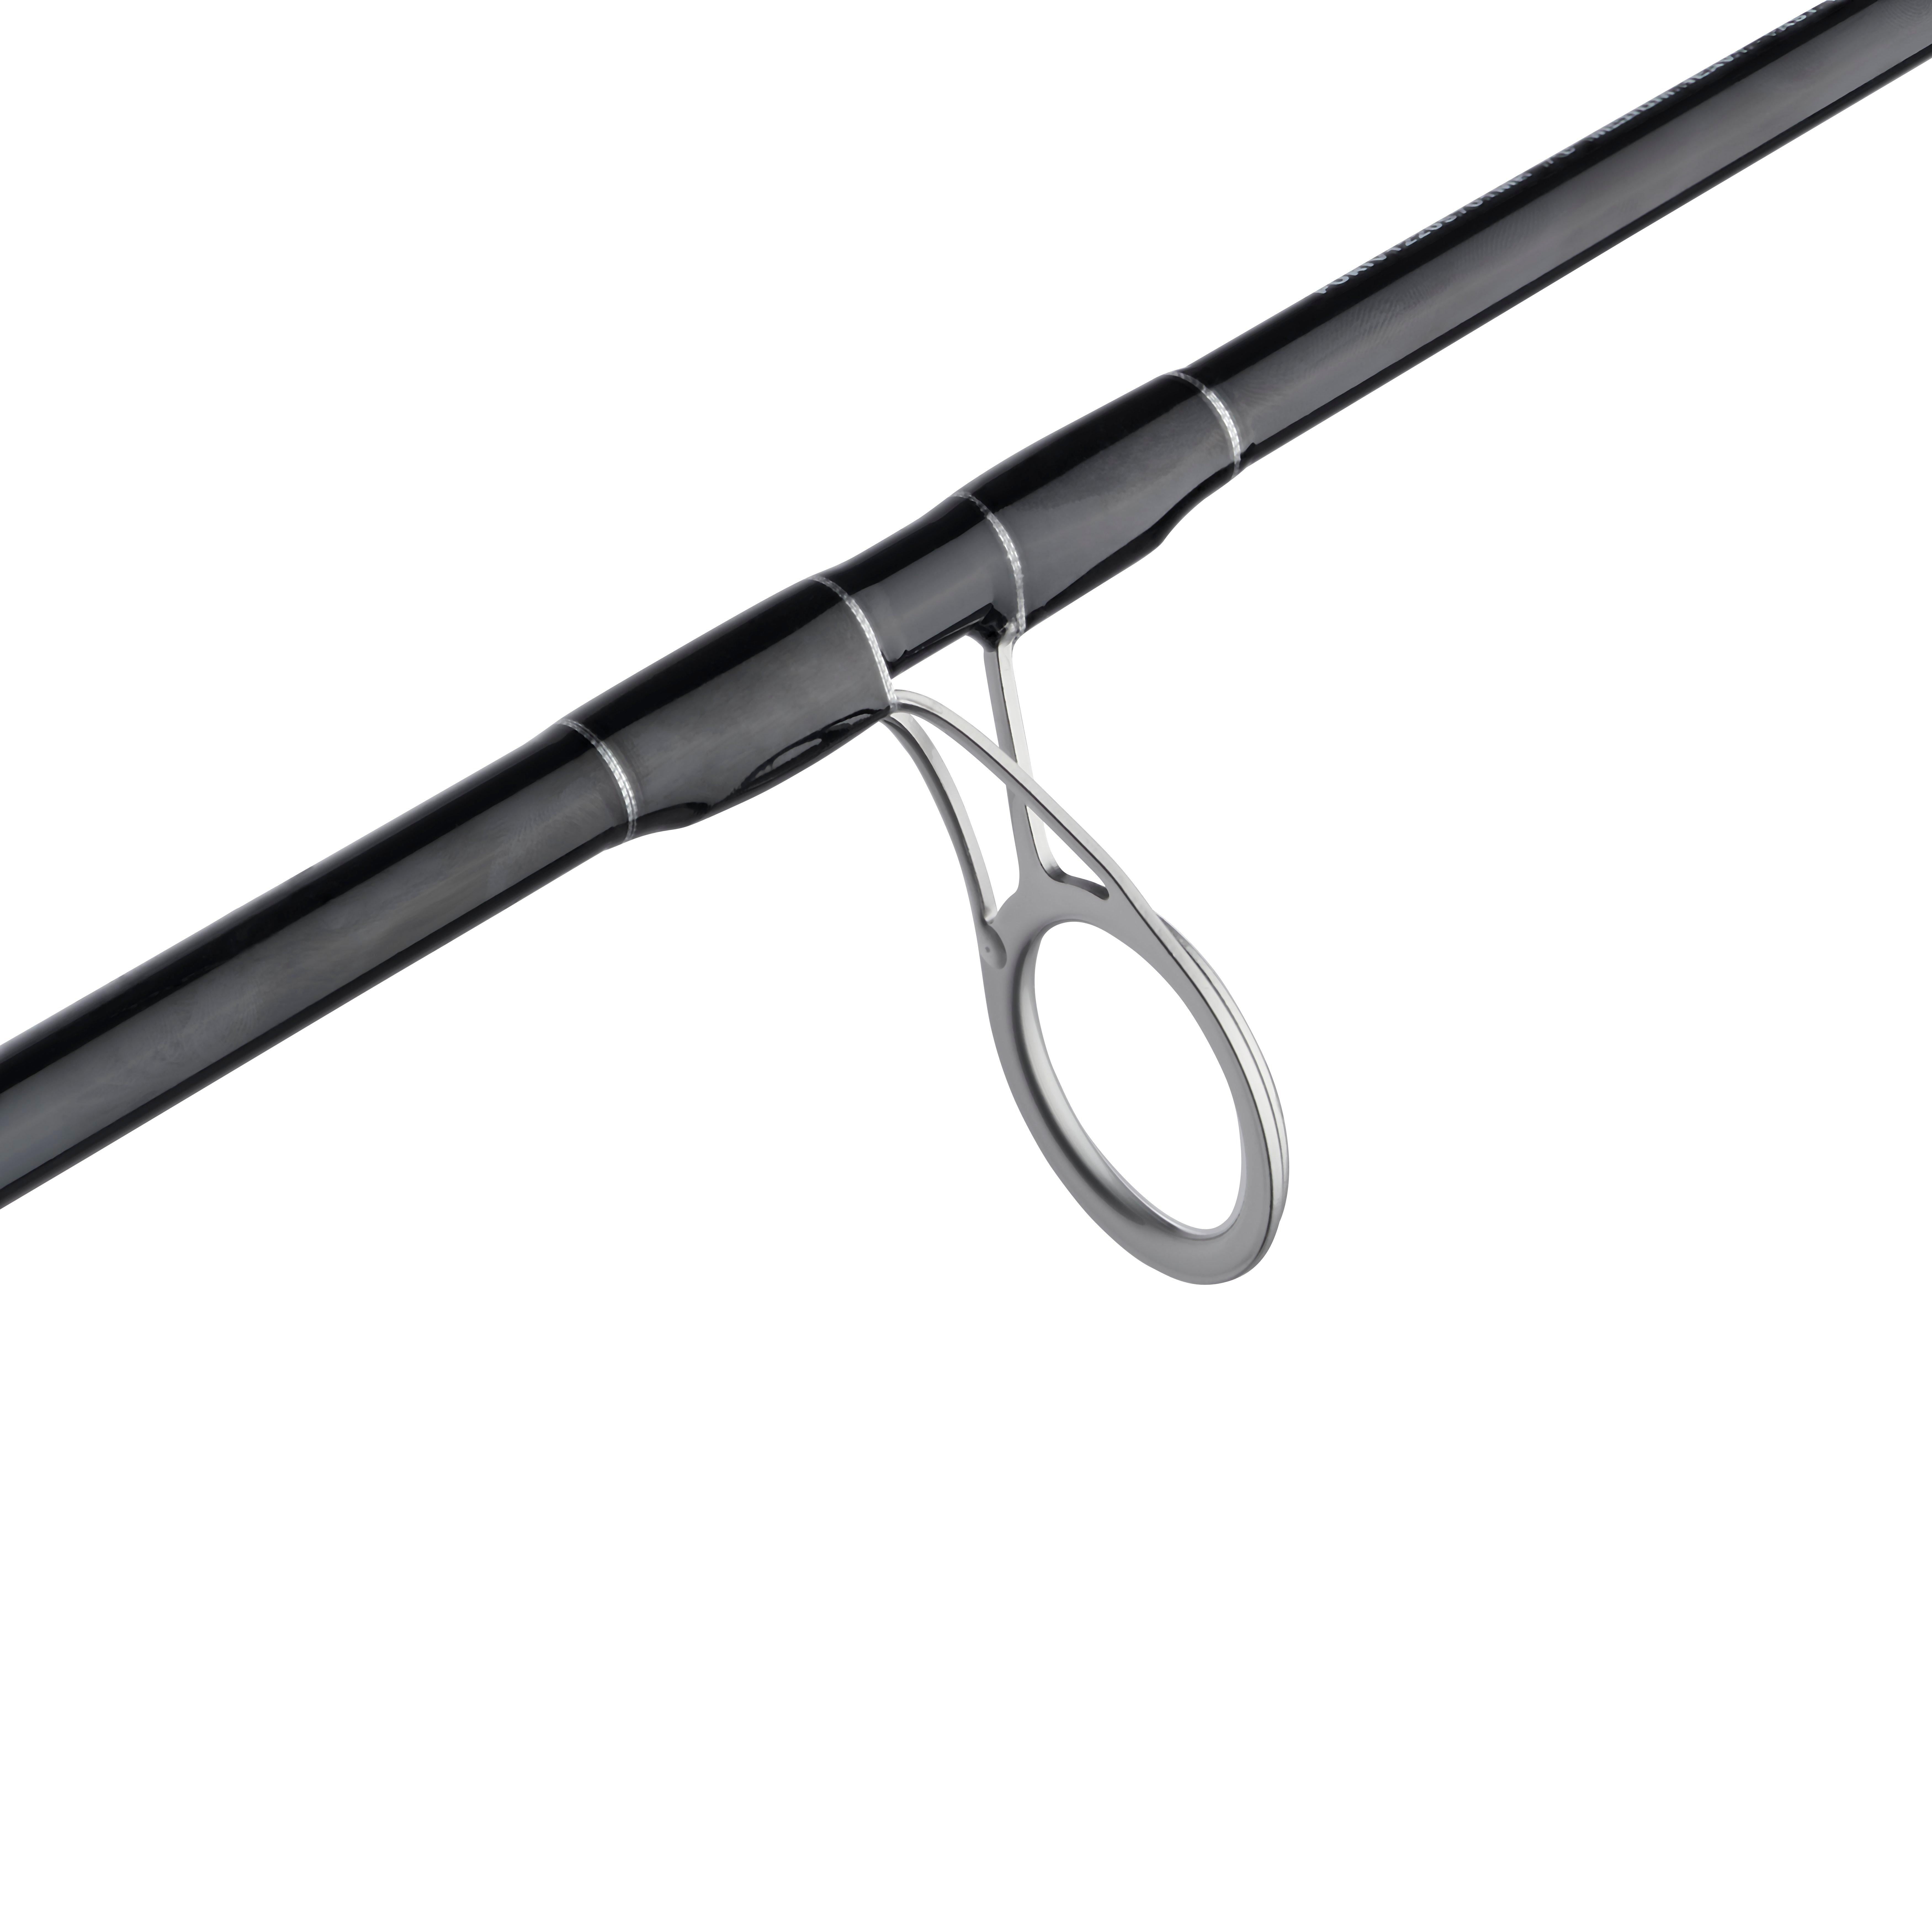 10 lbs. - 17 lbs. 7 ft. Passport Travel Spinning Rod, Includes Case